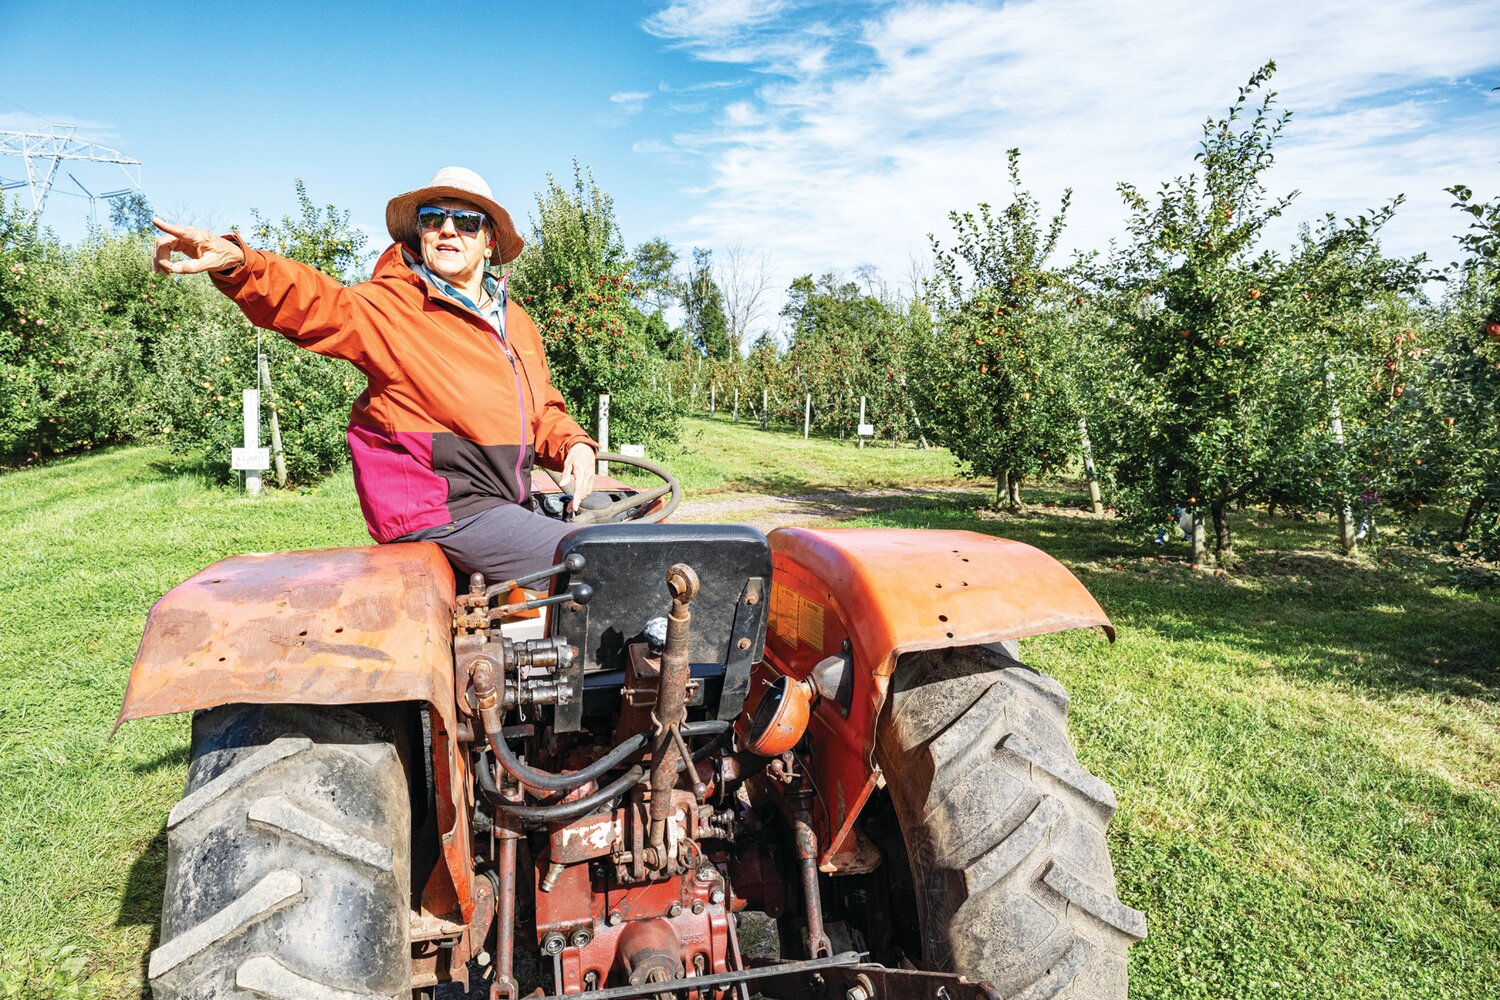 Solebury Orchards employee Kendra Schieber, who was driving a tractor pulling a wagon of families, points out the varieties of honeycrisp apples in the orchards.